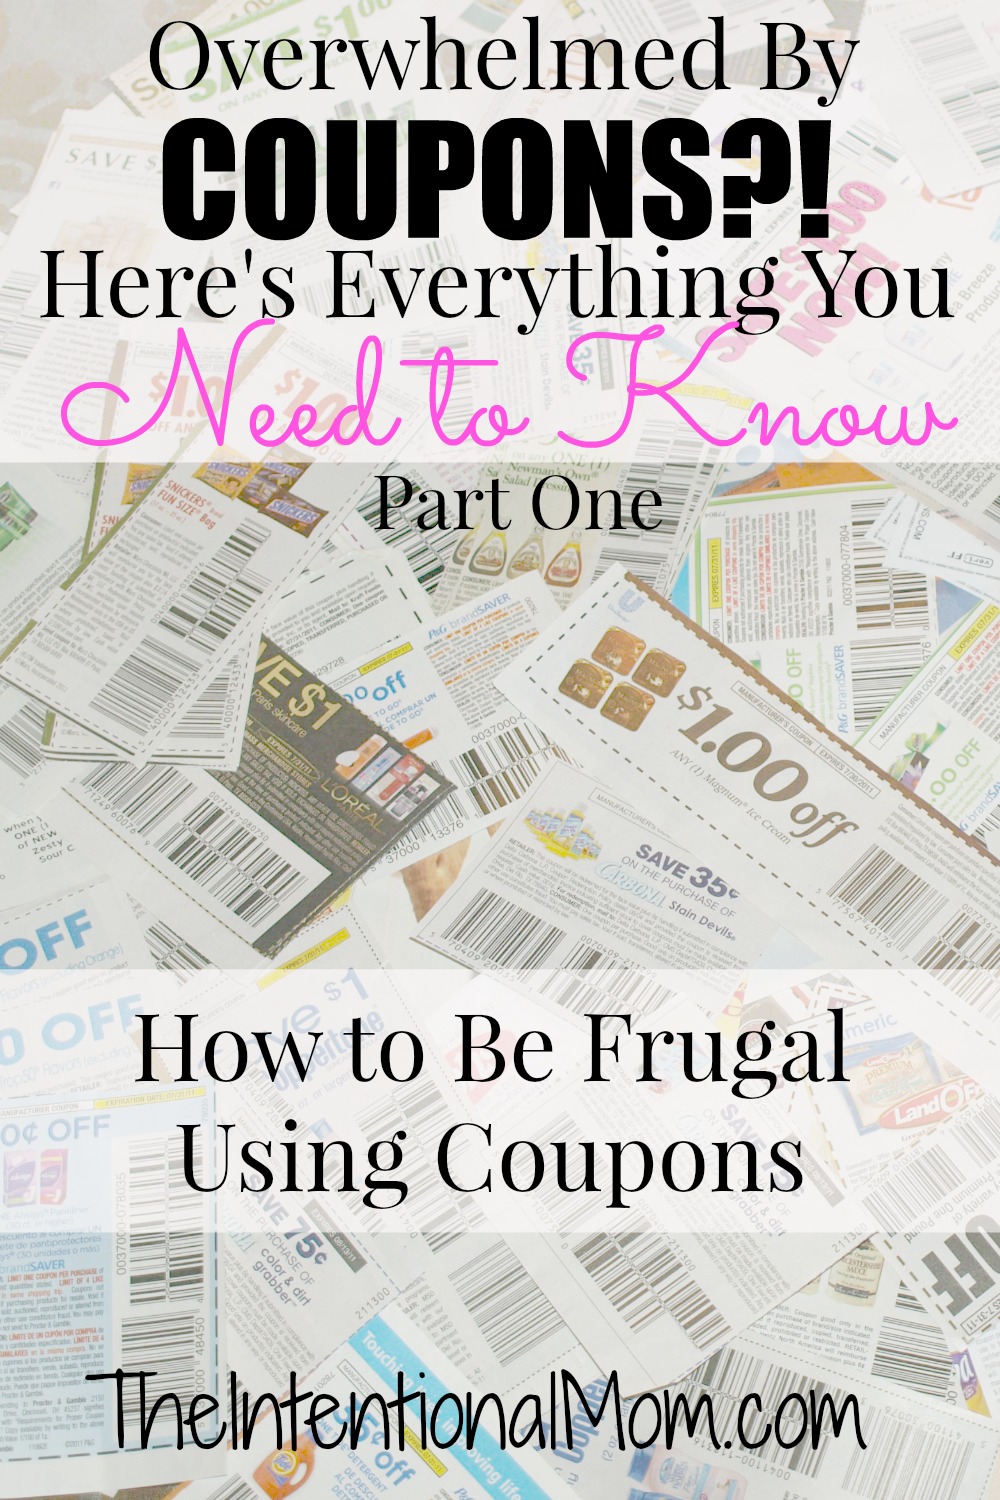 Overwhelmed By Coupons? Here’s Everything You Need to Know Part One (Day 3 in Our How to Be Frugal Series)